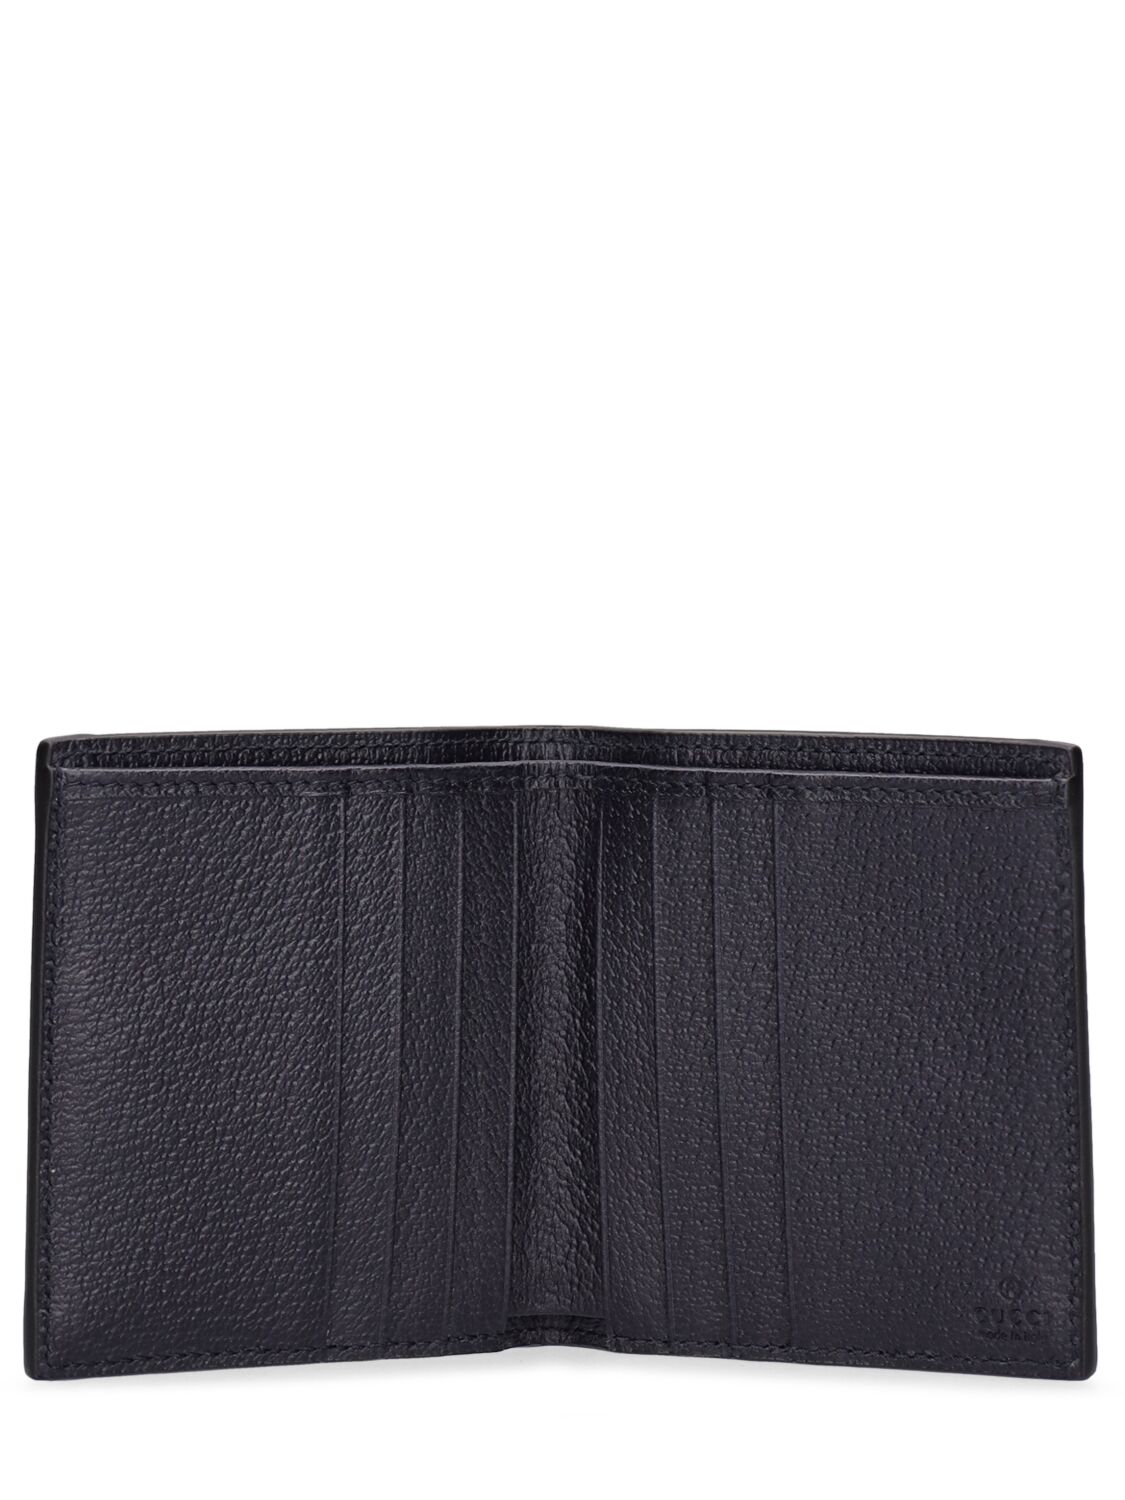 Ophidia GG wallet in grey and black Supreme